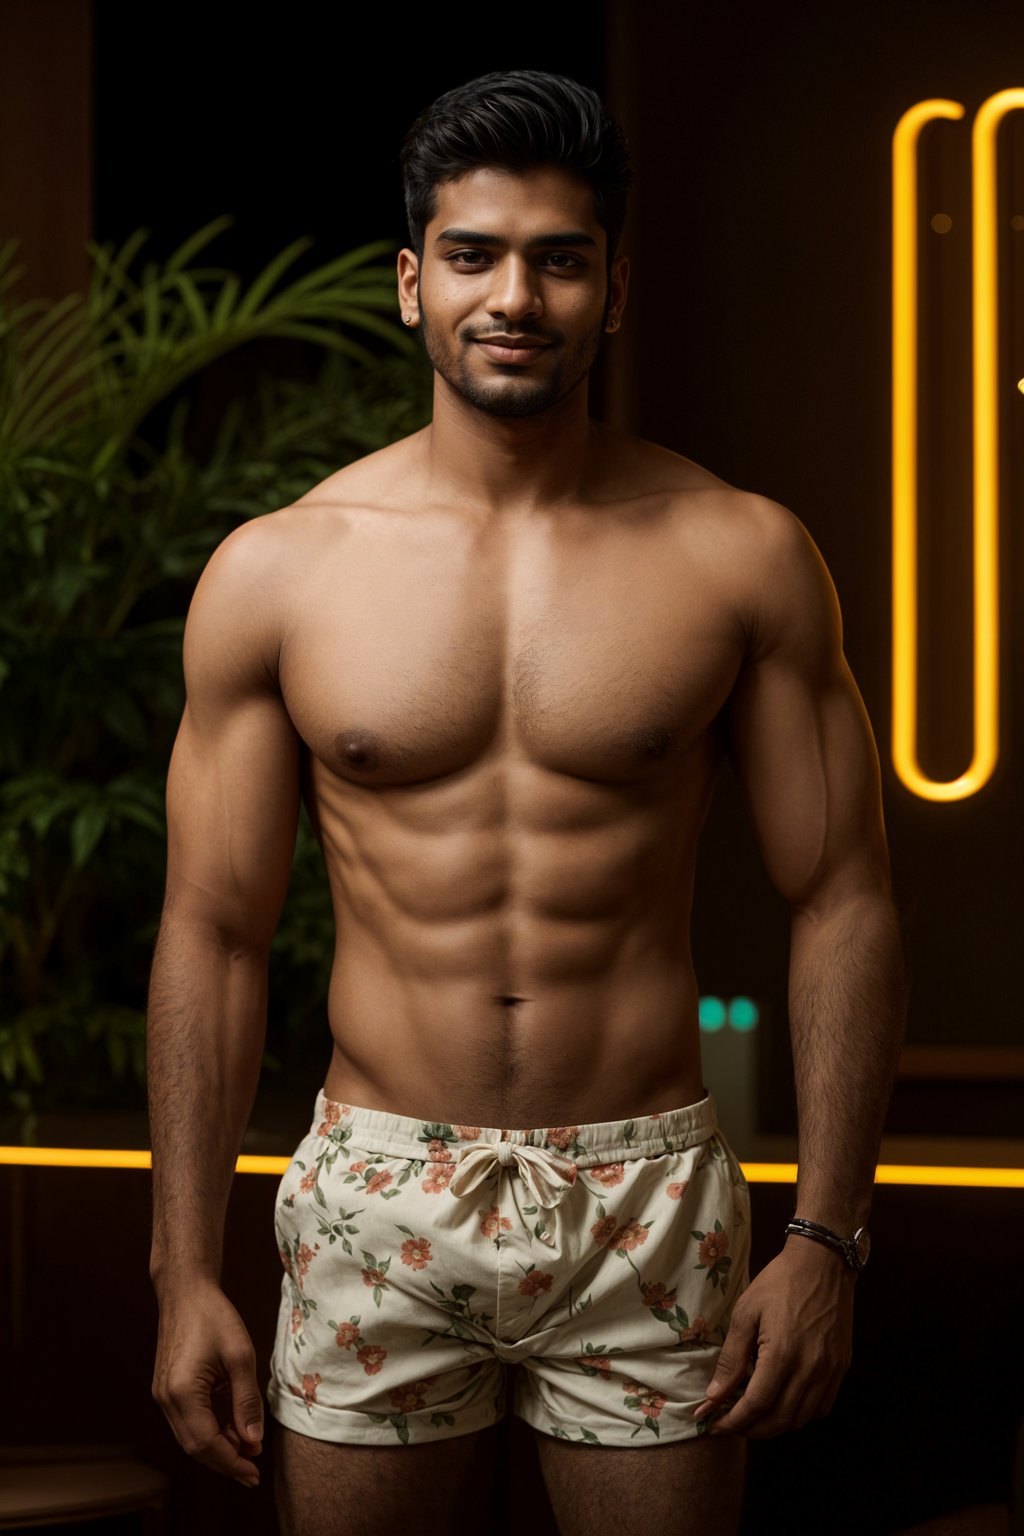 smiling man , fit body in floral silk  swim shorts and shirtless at cocktail bar with neon lights